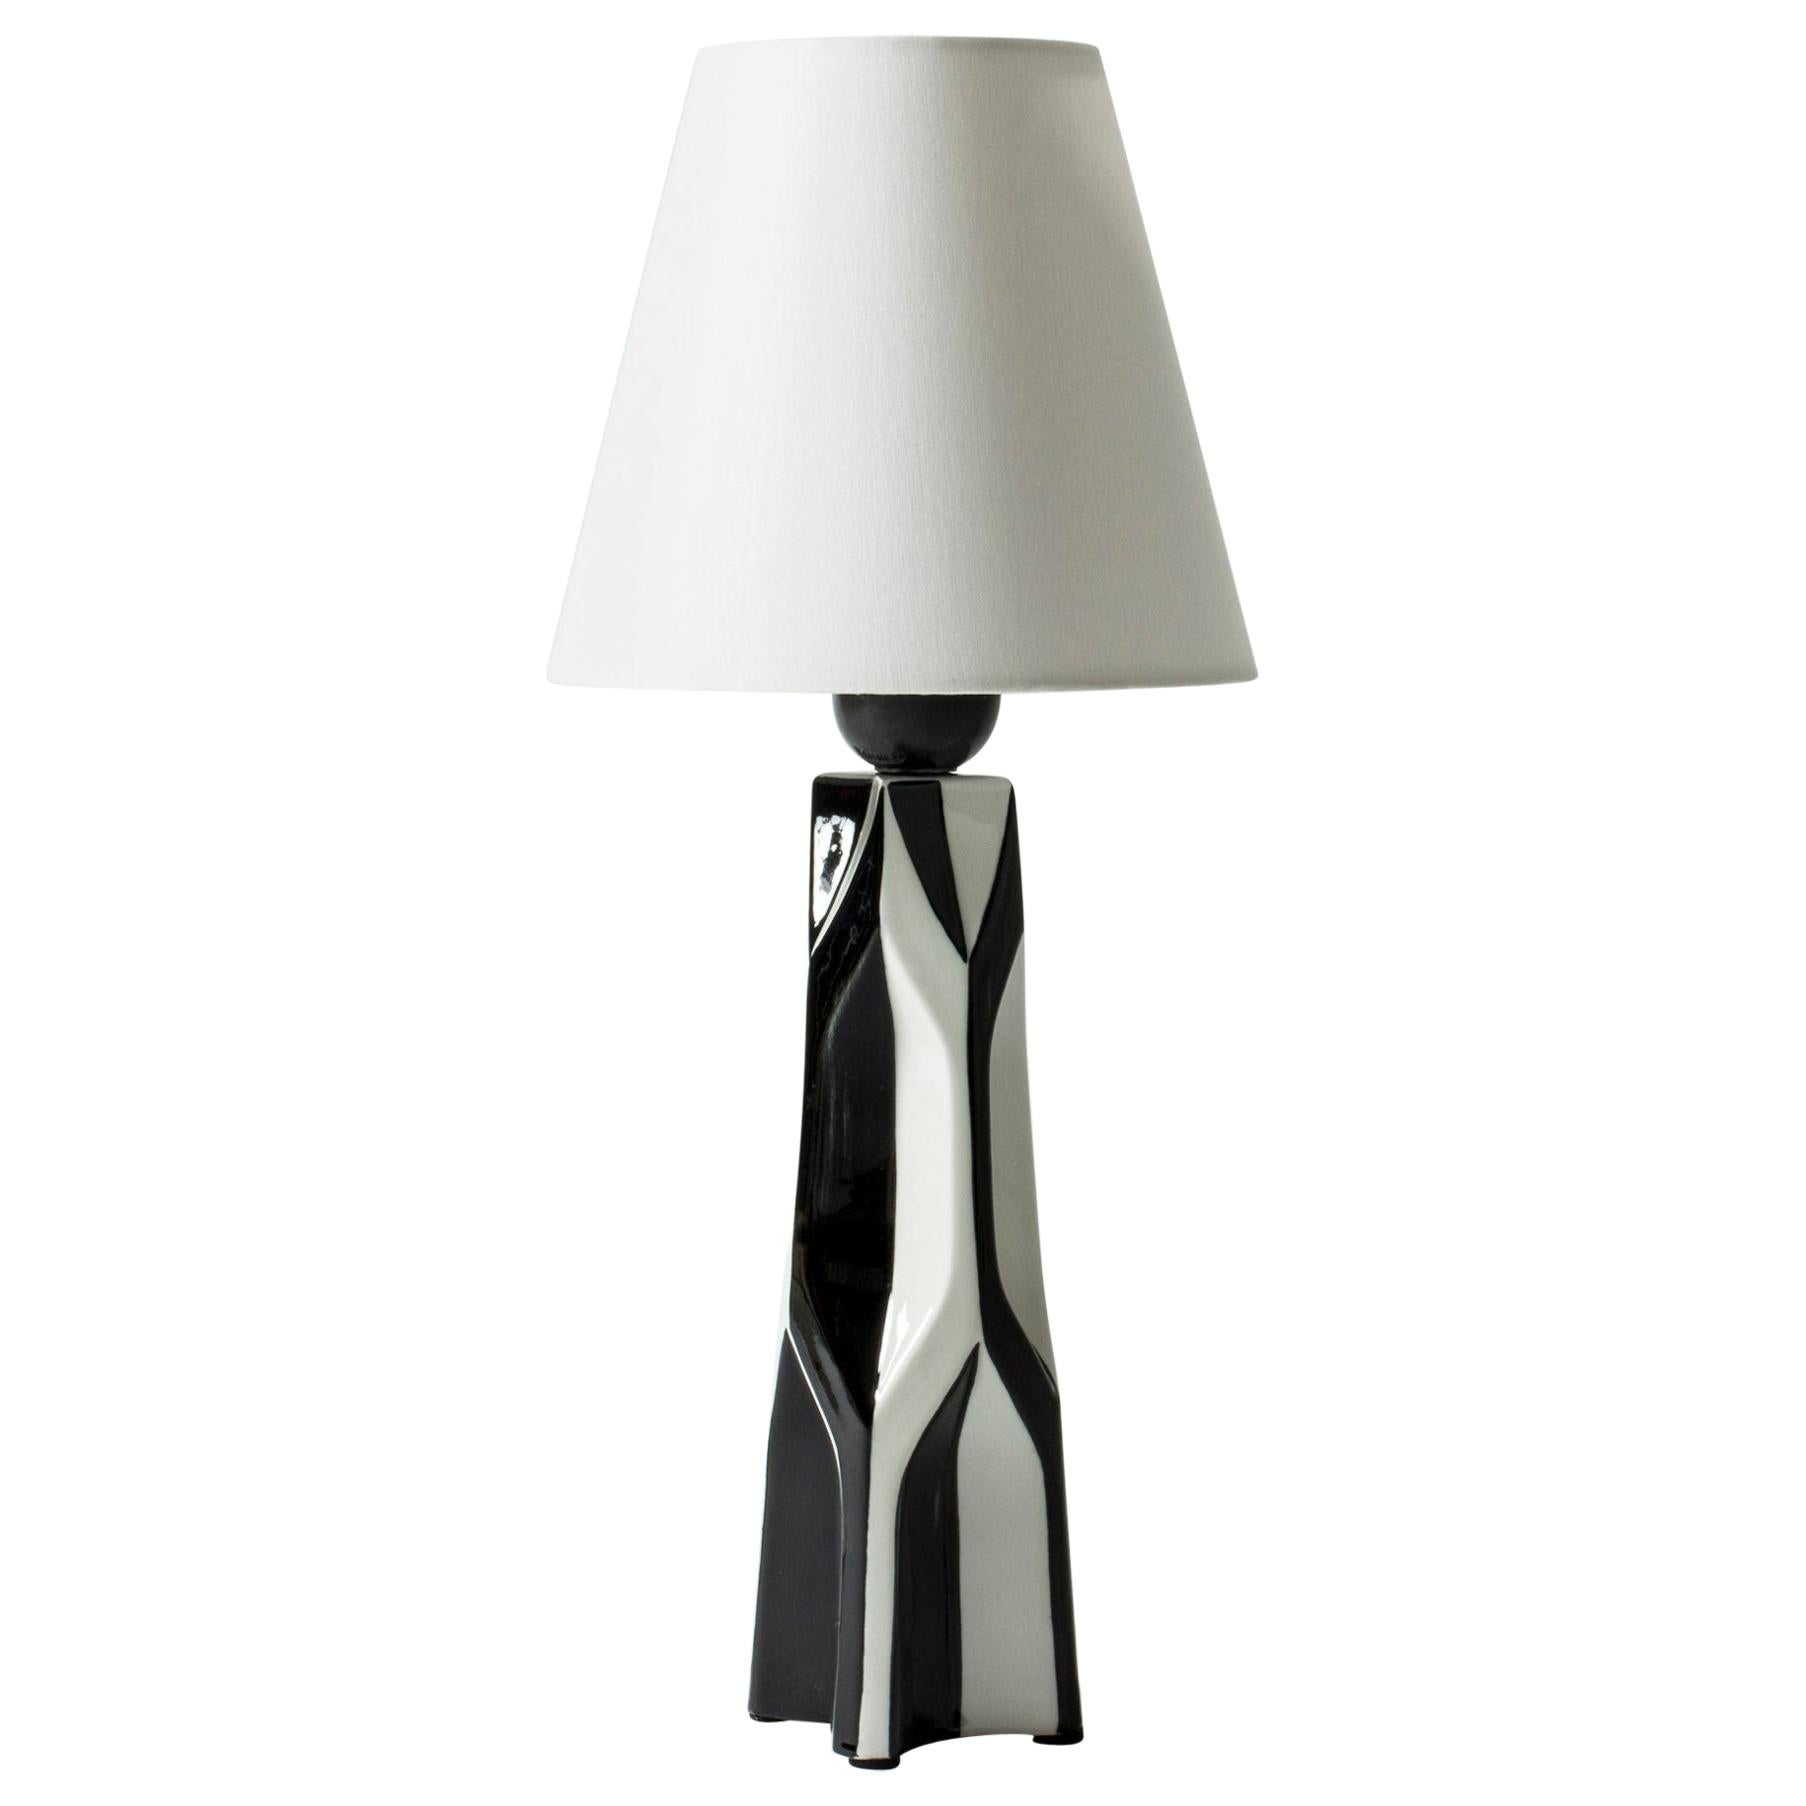 Stoneware Table Lamps By Carl Harry, Amazing Table Lamps